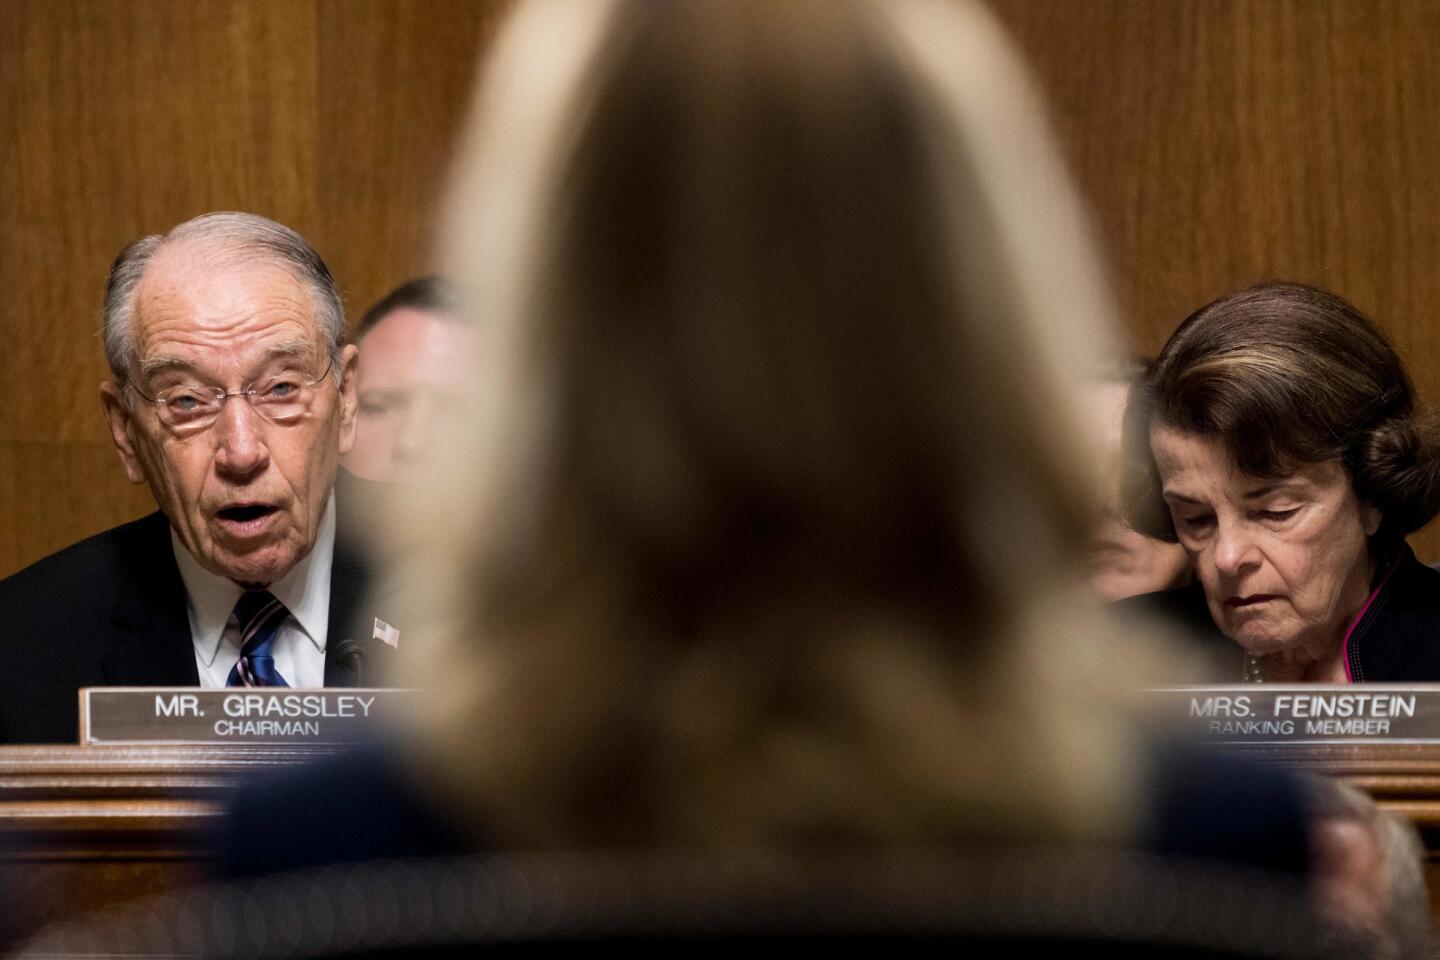 Senate Judiciary Committee chairman Charles Grassley, left, with Senator Dianne Feinstein, right, gives a preliminary statement before Christine Blasey Ford, the woman accusing Supreme Court nominee Brett Kavanaugh of sexually assaulting her at a party 36 years ago.